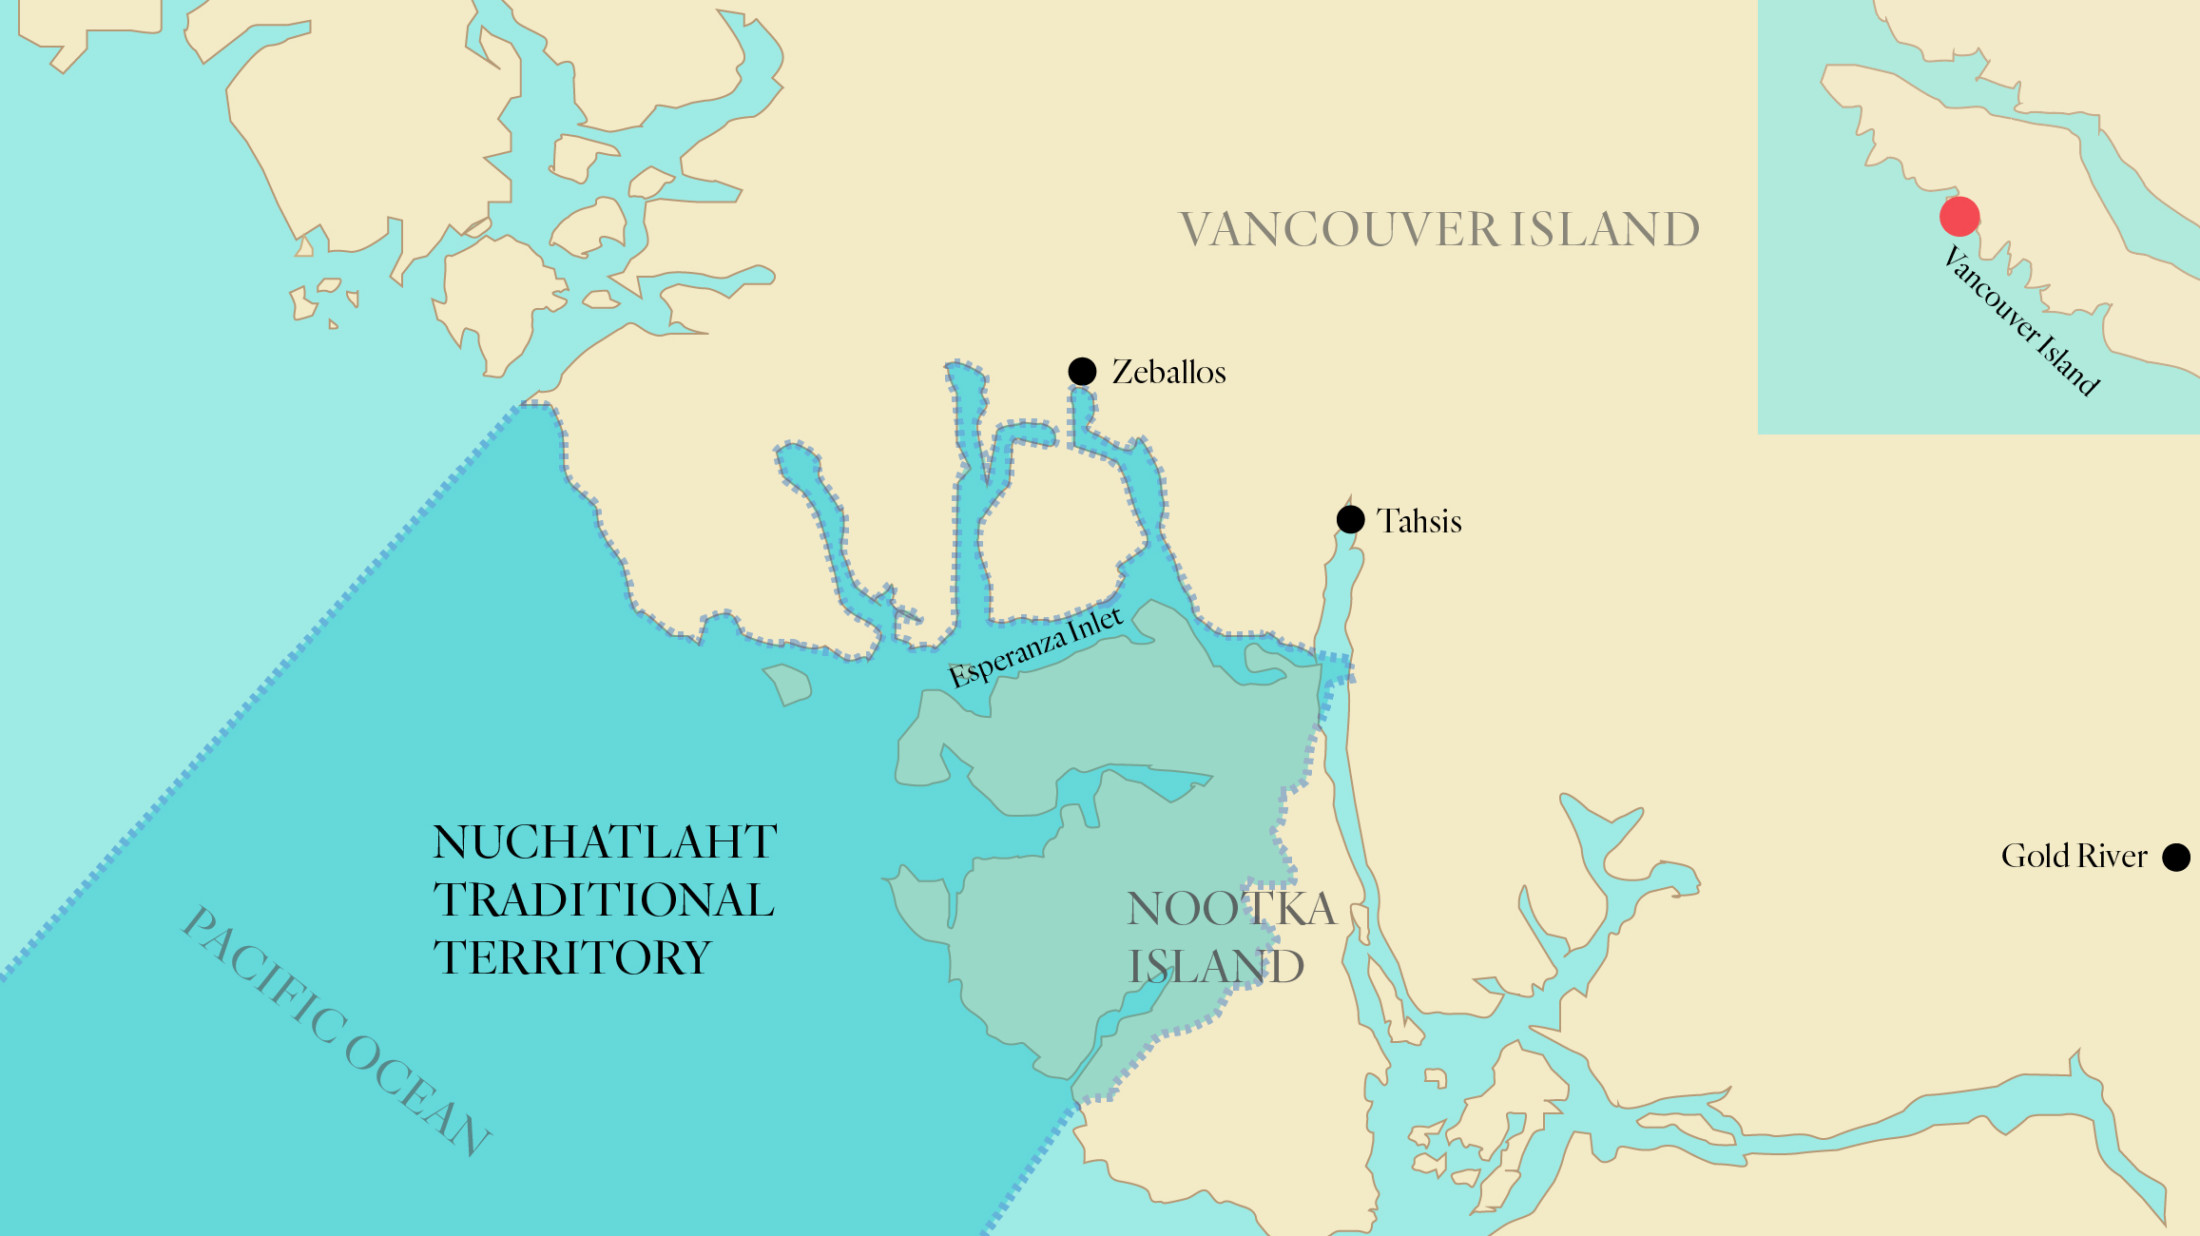 A map showing the traditional territory of the Nuchatlaht First Nation's traditional territory